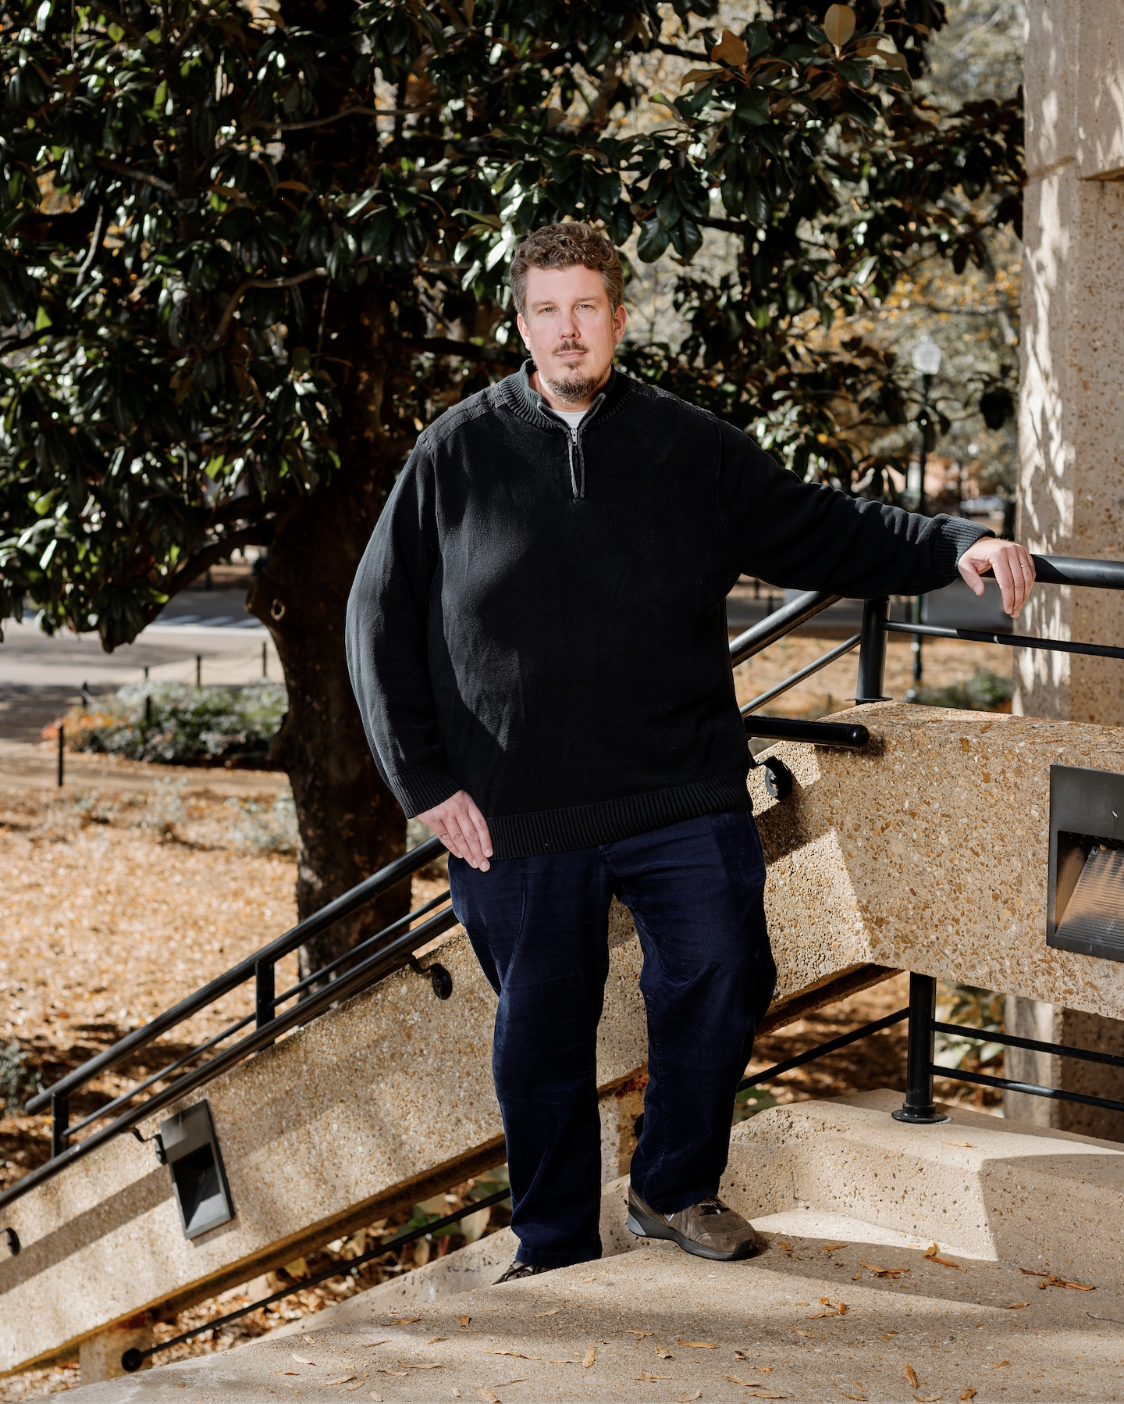 Marc Watkins, an academic innovation fellow and lecturer at the University of Mississippi, has been vigorously researching AI language models like ChatGPT to find ways for his students to use it in a productive way for learning. (Houston Cofield for The Washington Post)